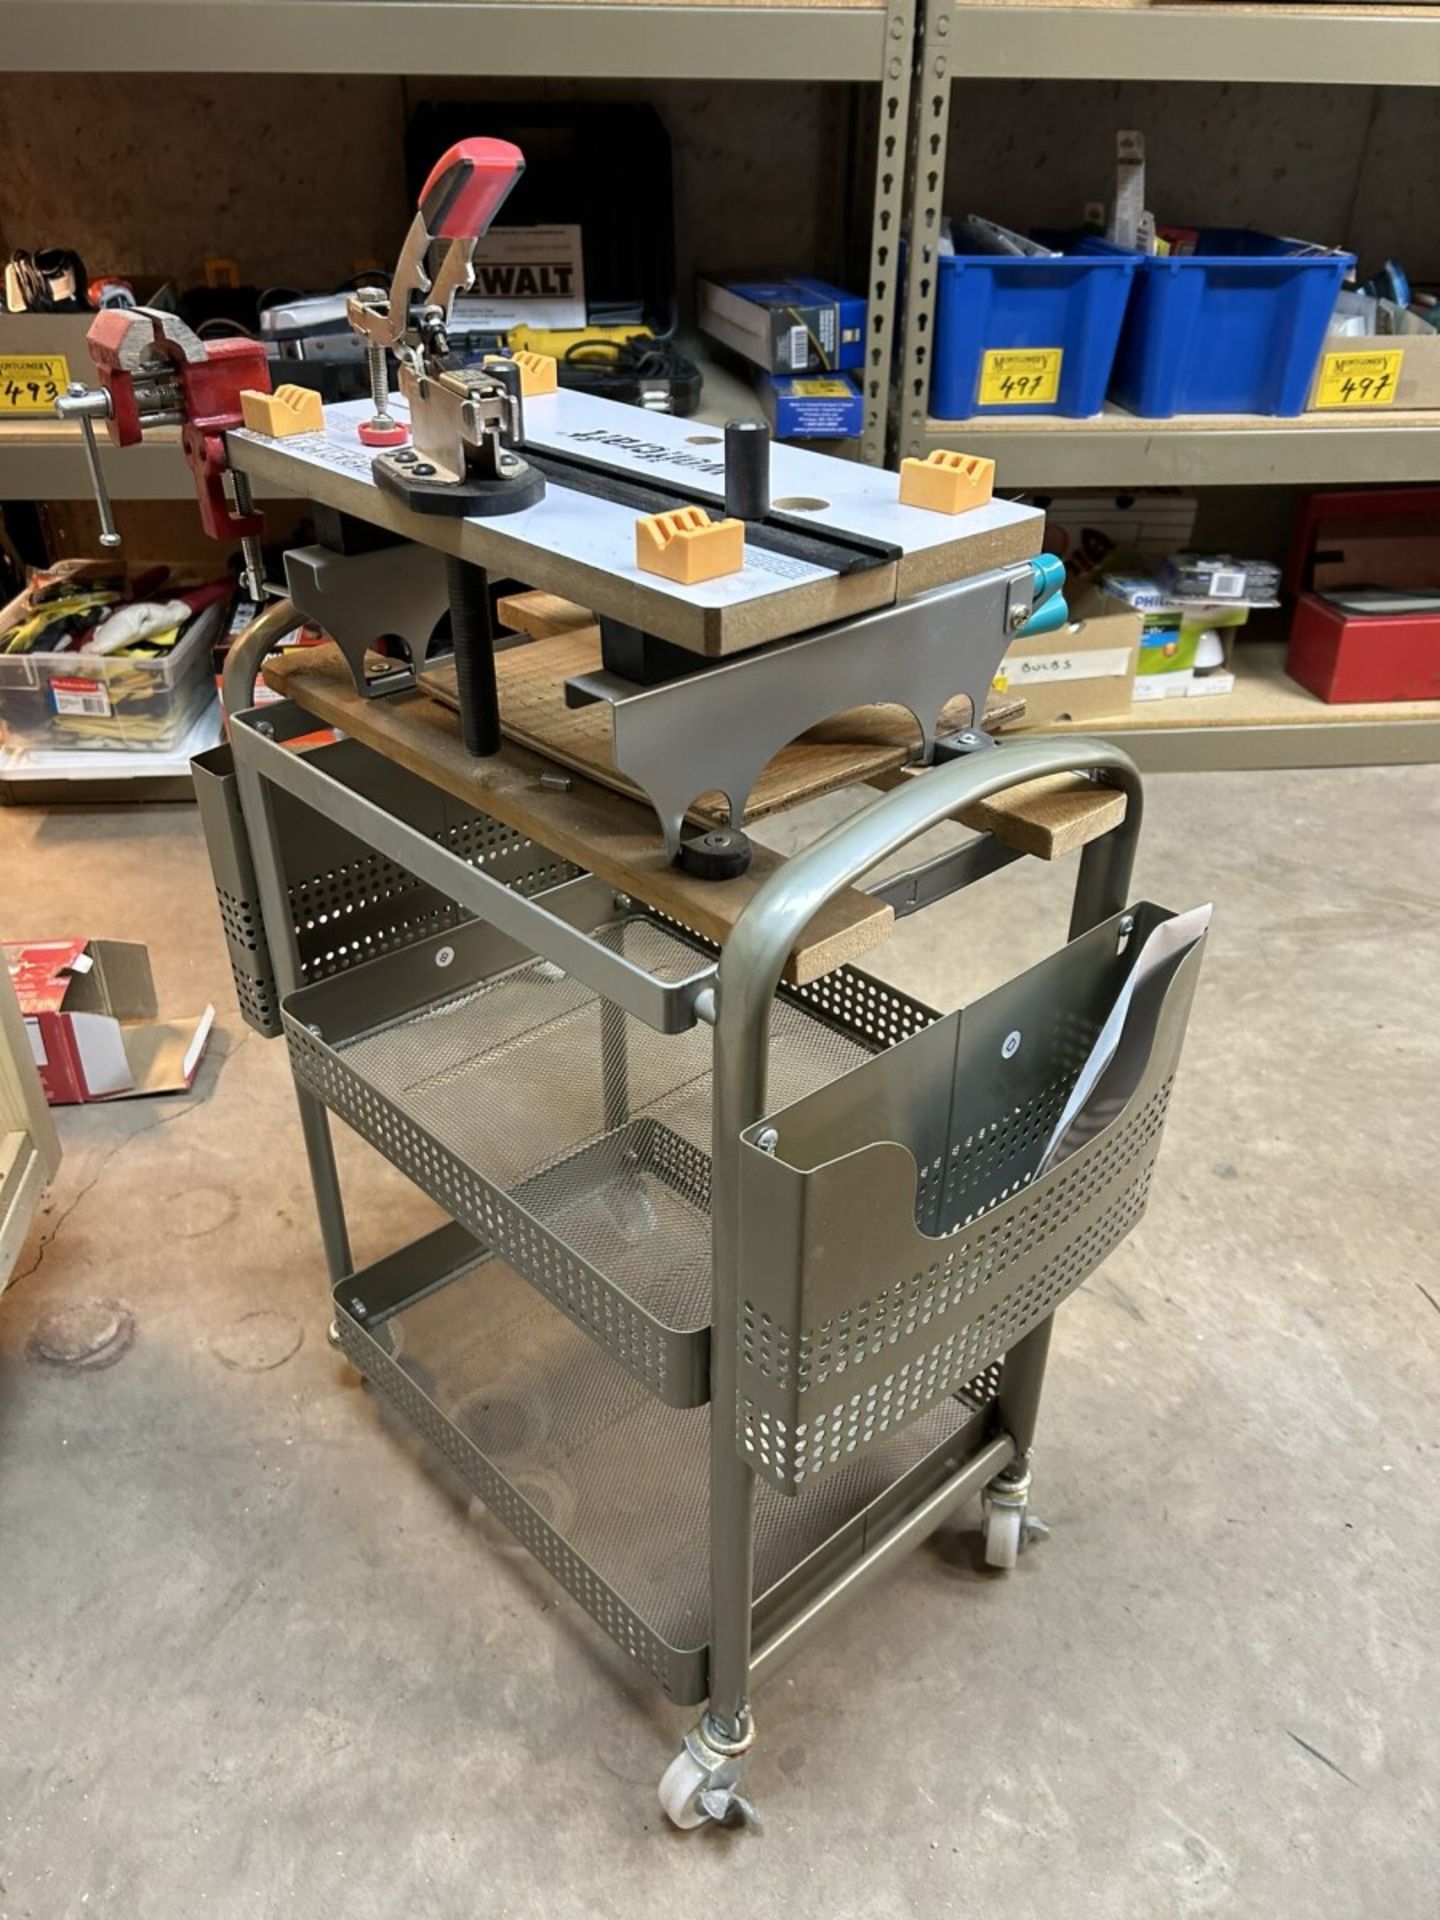 WOLF CRAFT PORTABLE WORK TABLE - TOP VISE ON METAL ROLLING CART (CART SIZE: 22X12X24) - Image 7 of 10